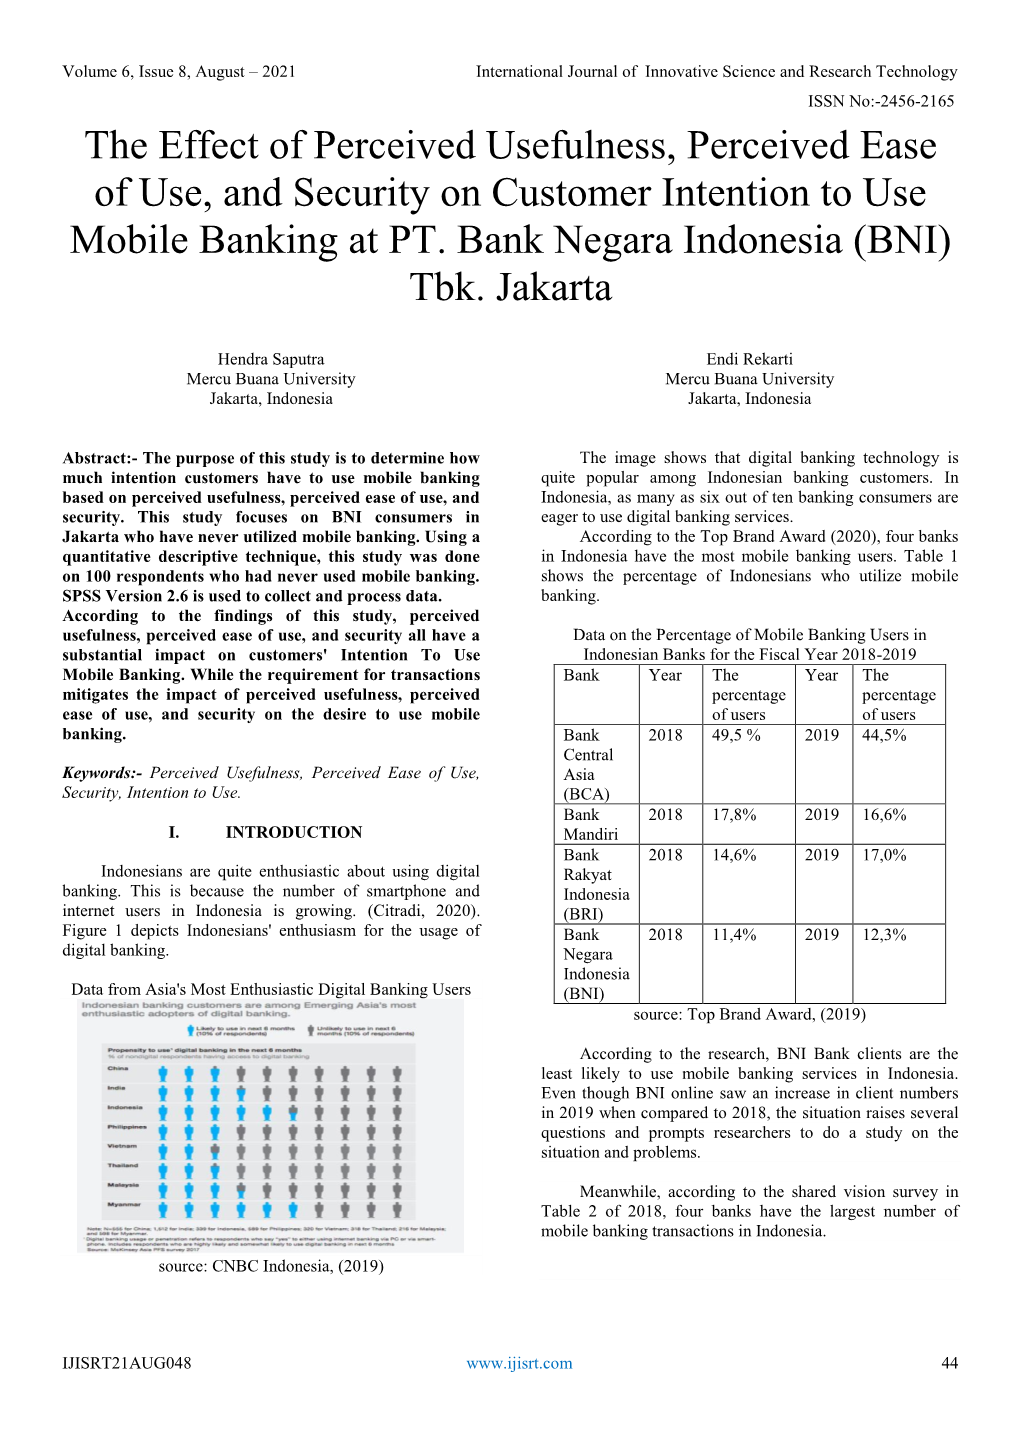 The Effect of Perceived Usefulness, Perceived Ease of Use, and Security on Customer Intention to Use Mobile Banking at PT